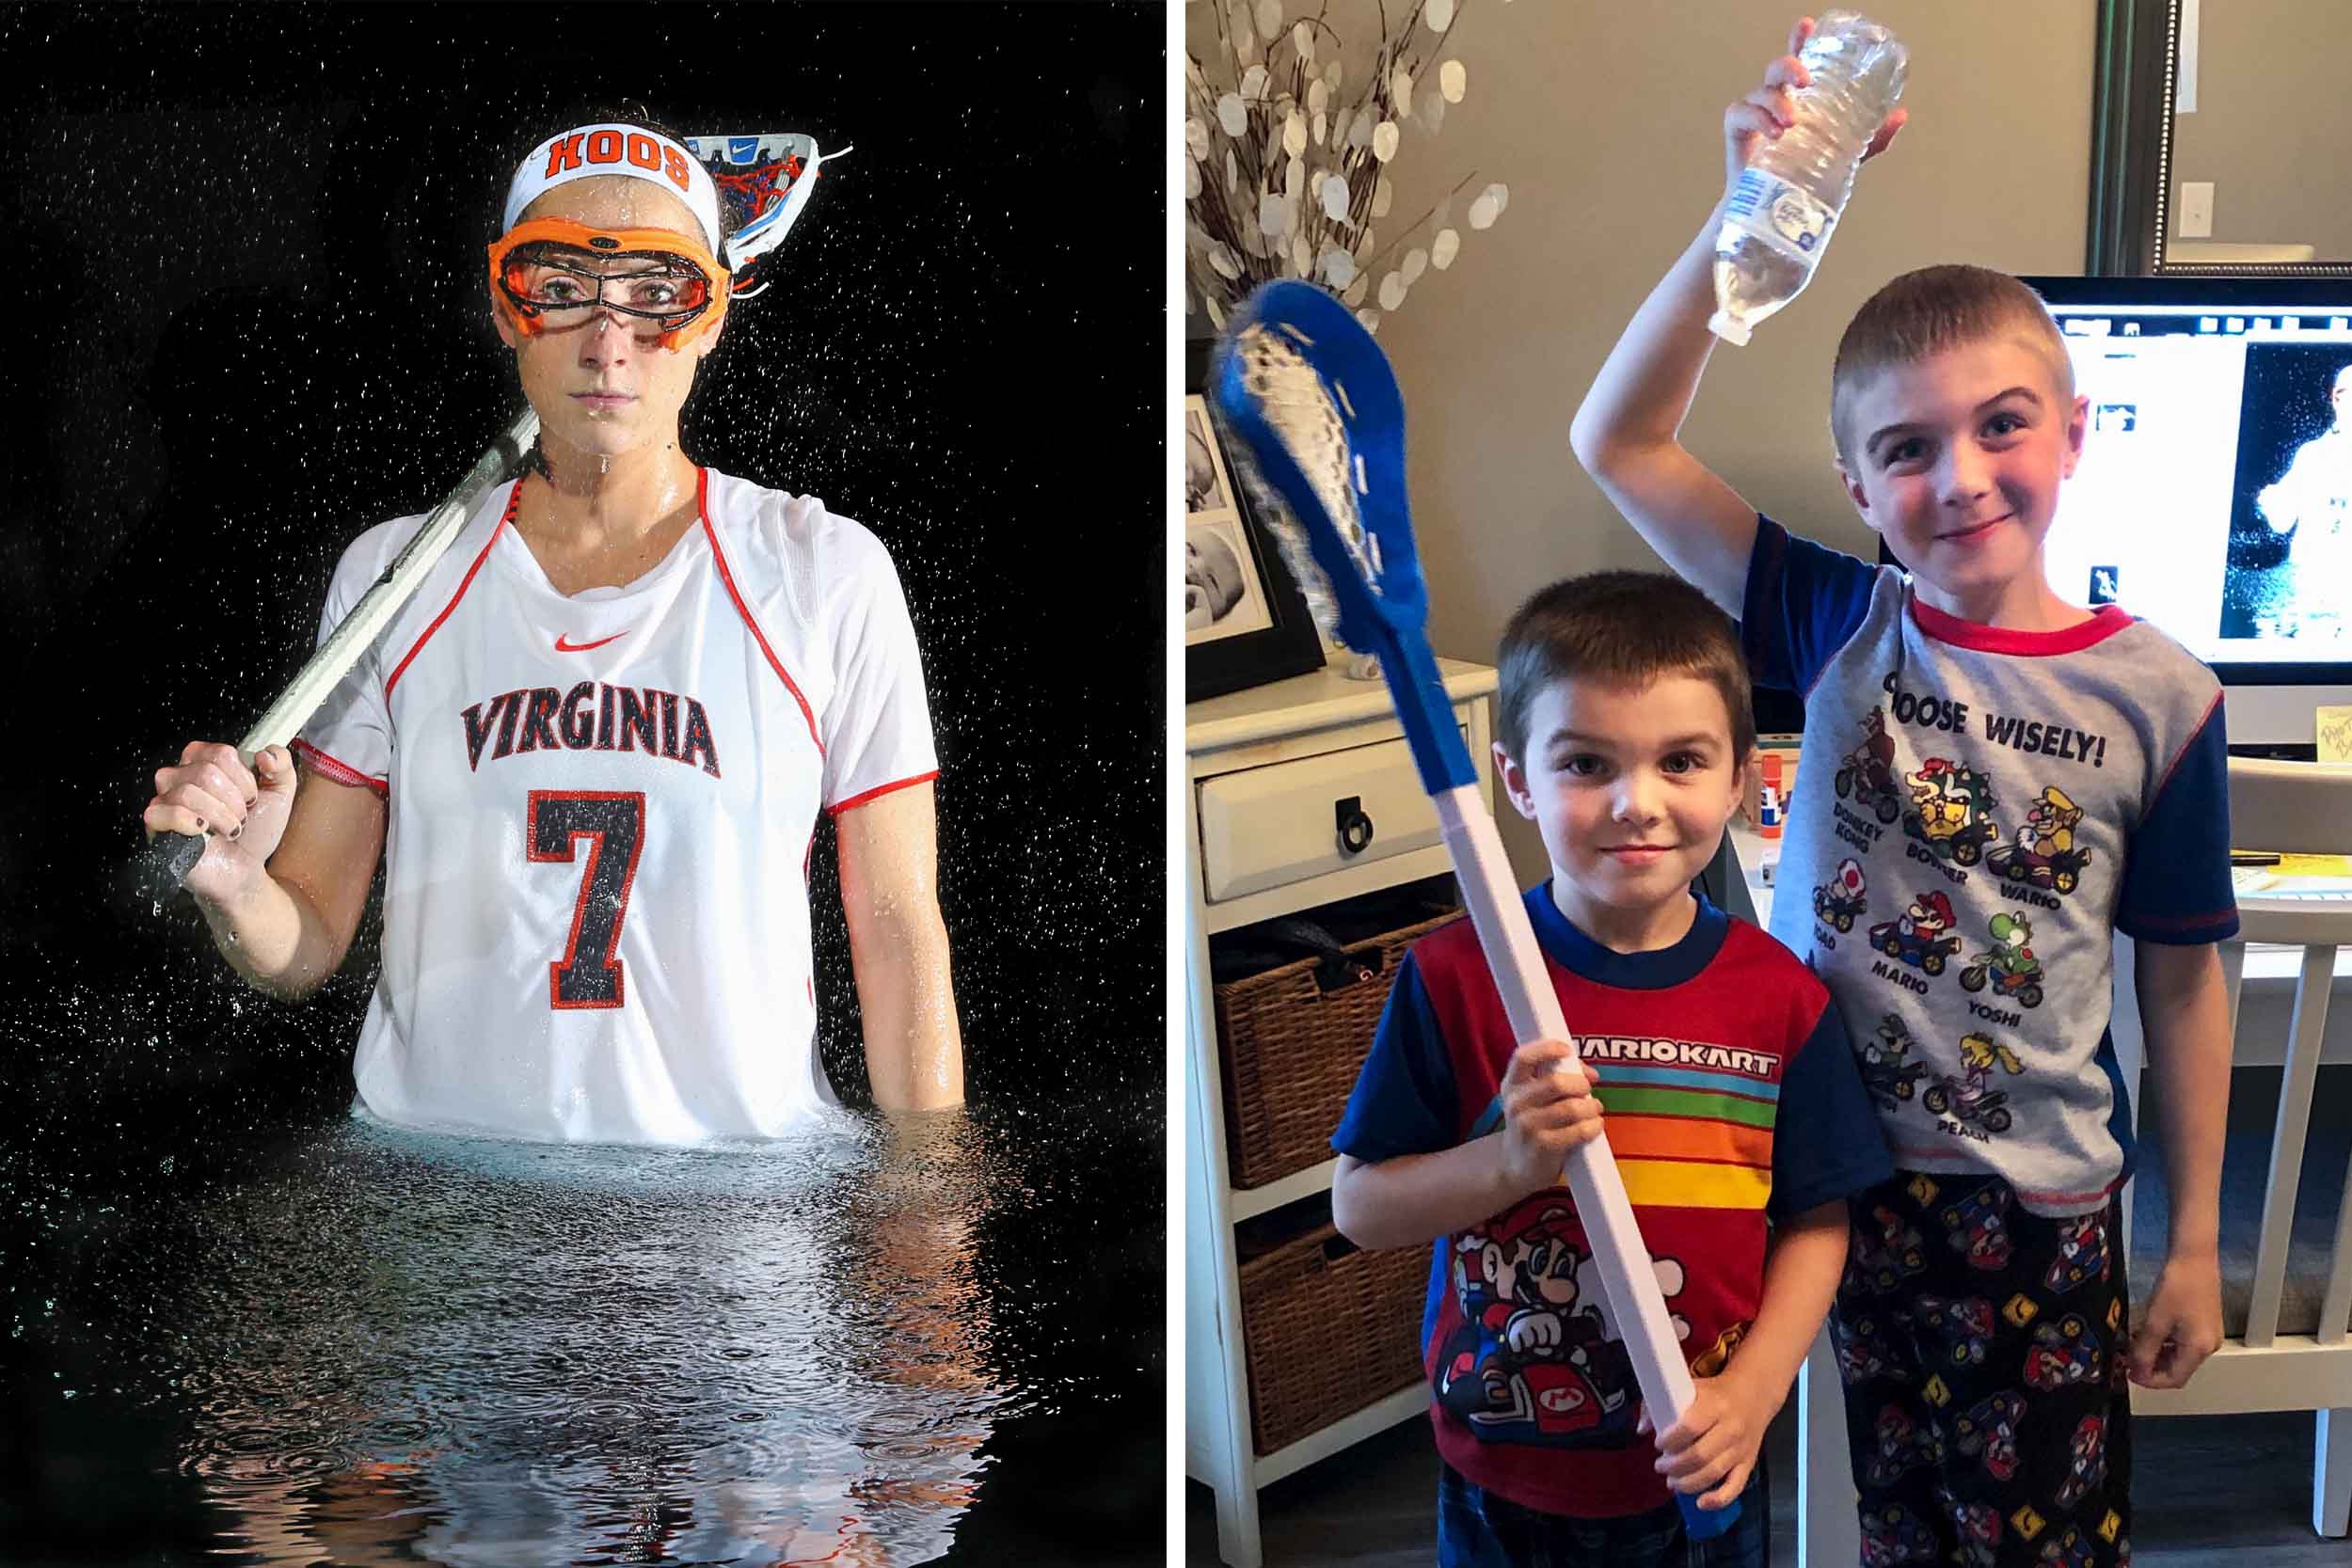 left: UVA womens lacrosse player holding her lacrosse stick in water, right: two little boys recreating the picture on the left